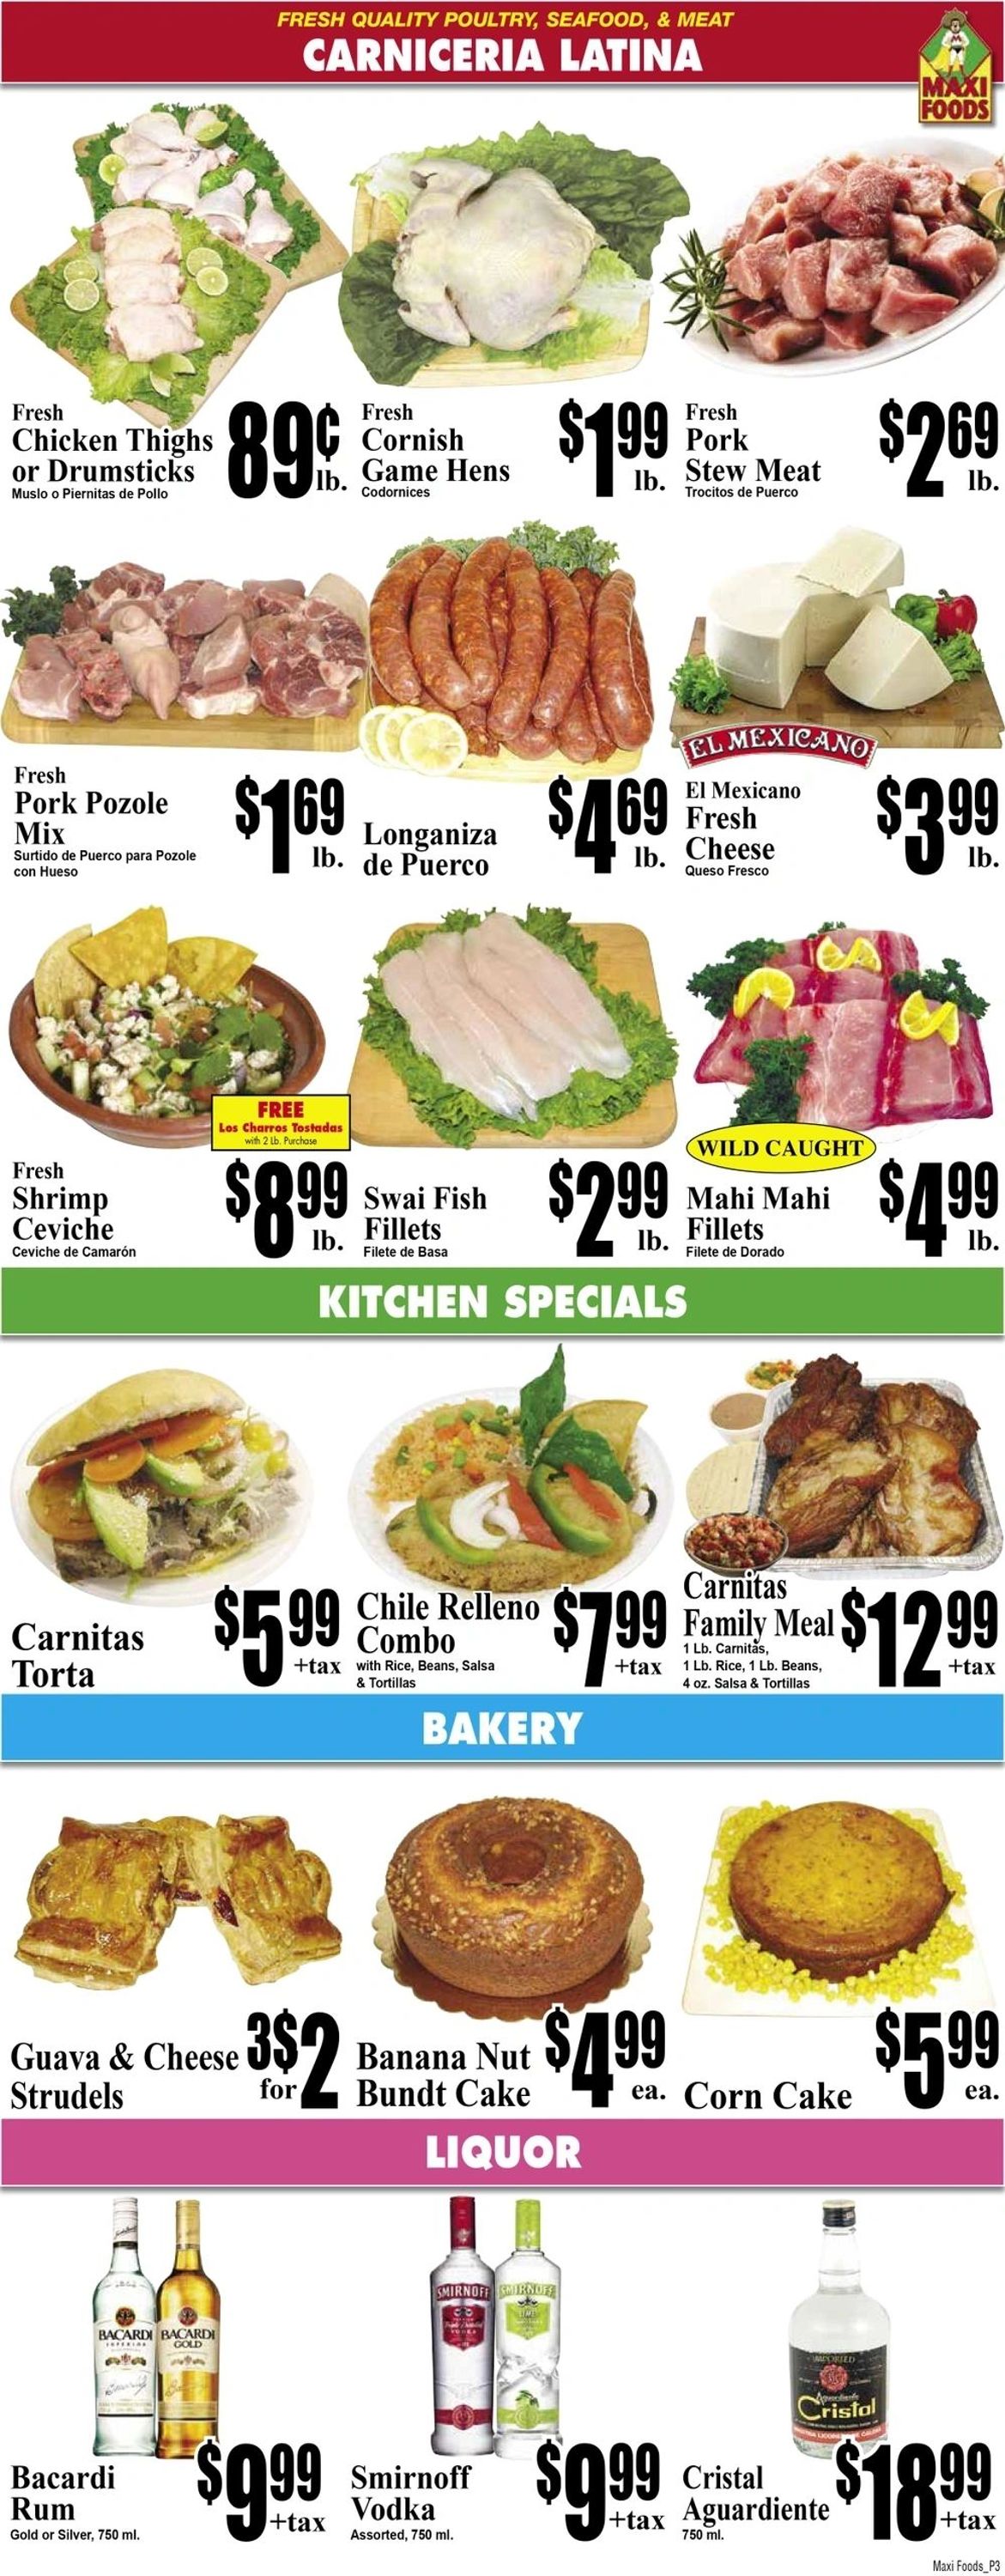 Maxi Foods Ad from 06/09/2021